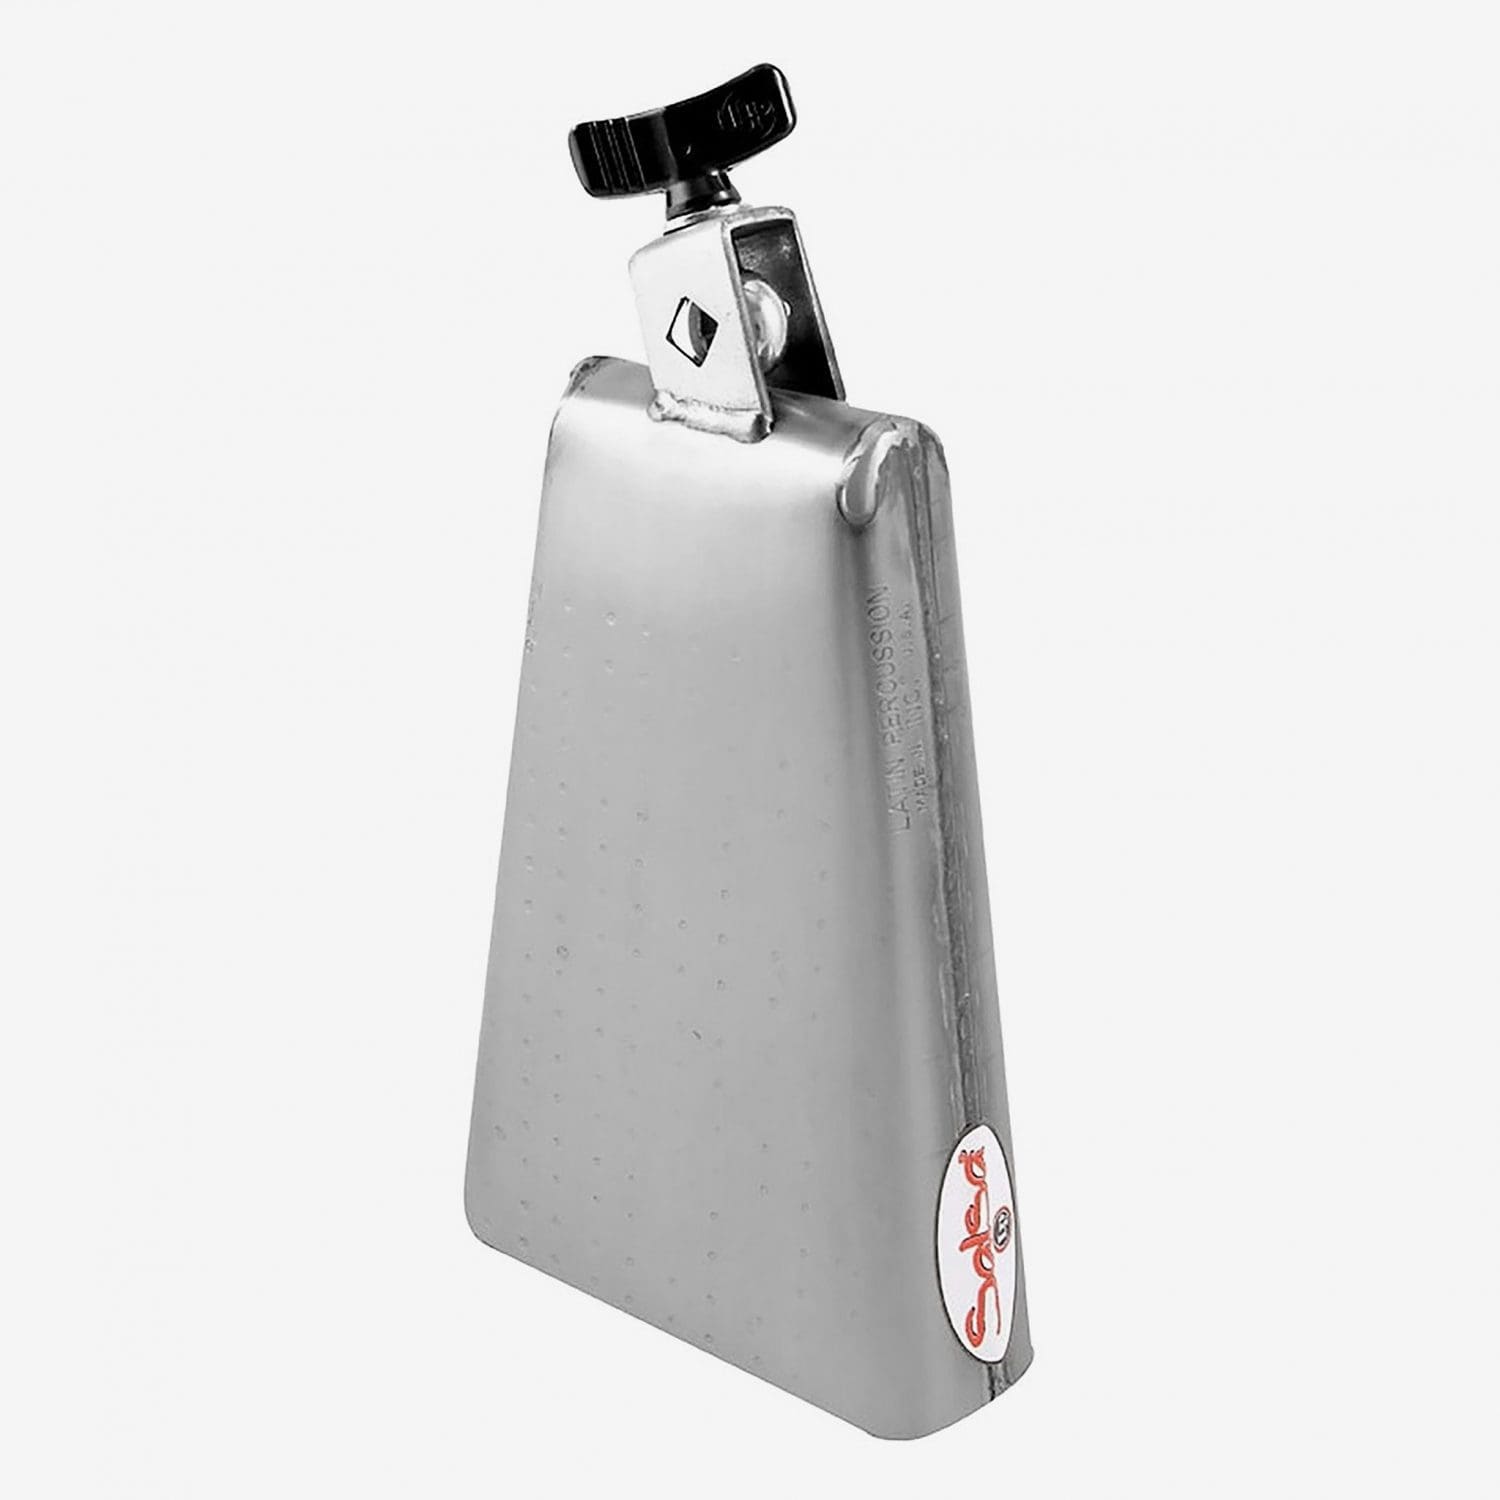 Latin Percussion Salsa Timbale Cowbell